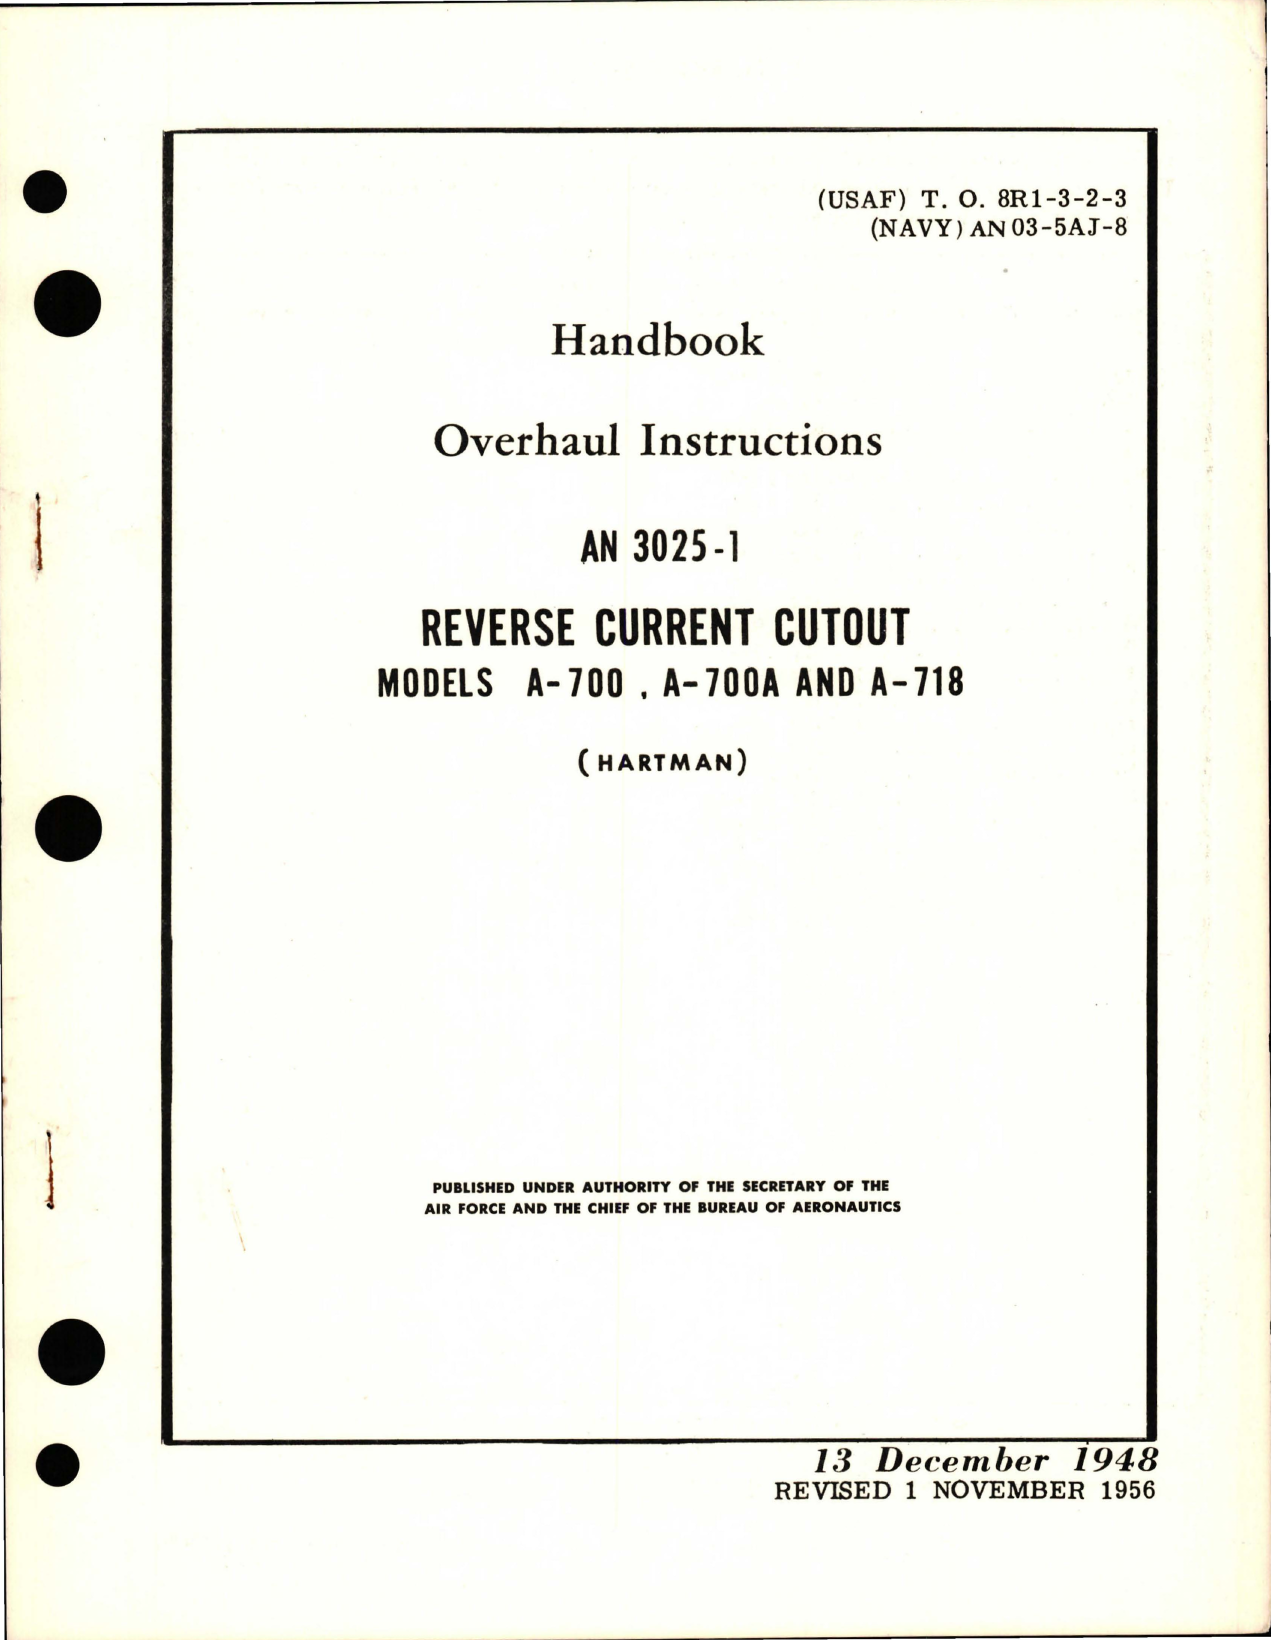 Sample page 1 from AirCorps Library document: Overhaul Instructions for Reverse Current Cutout - AN 3025-1 - Models A-700, A-700A, and A-718